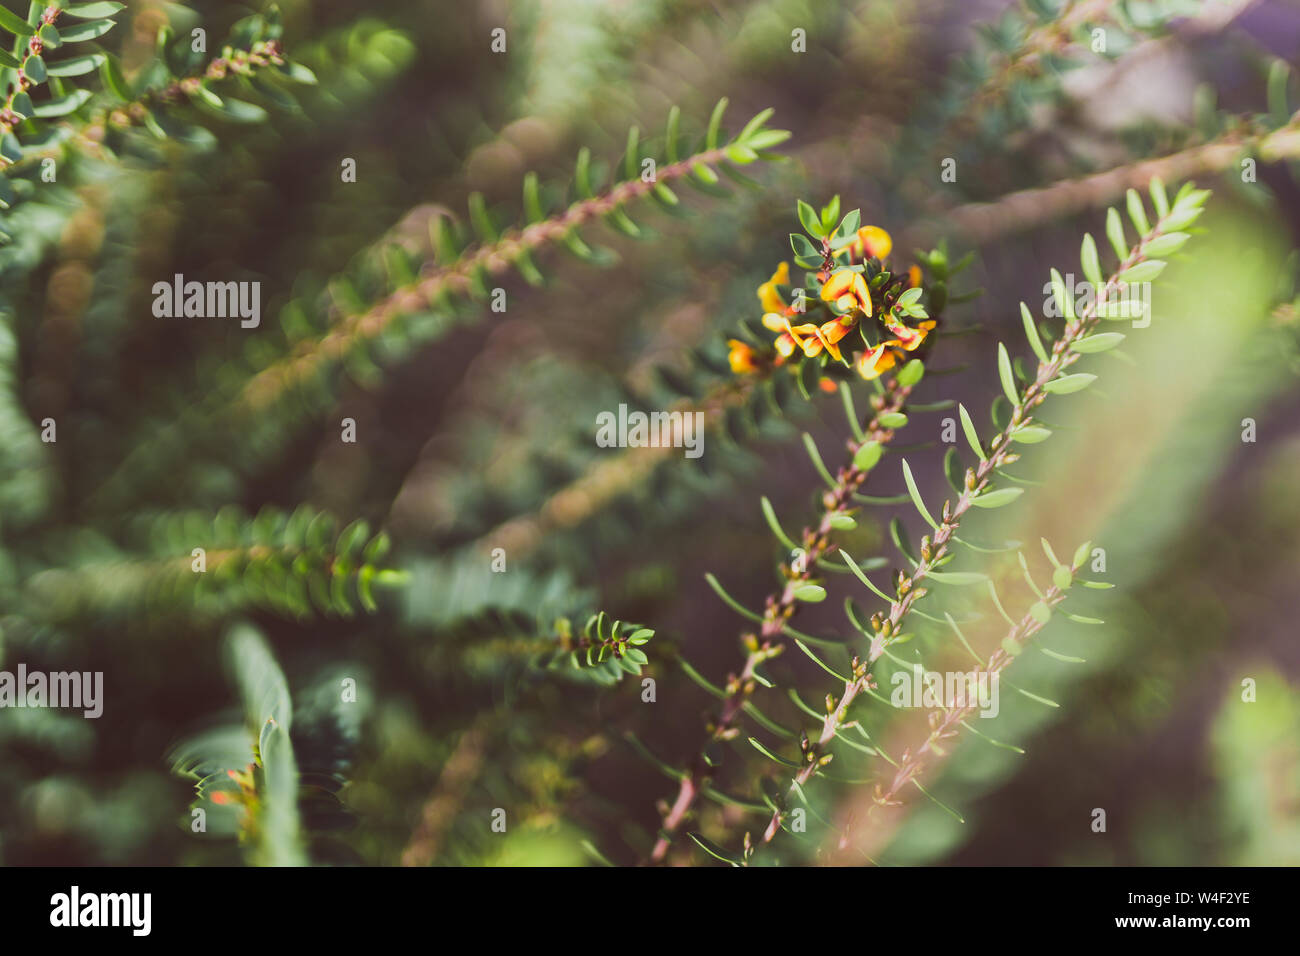 eutaxia obovata also called egg and bacon plant with yellow flowers shot at shallow depth of field Stock Photo